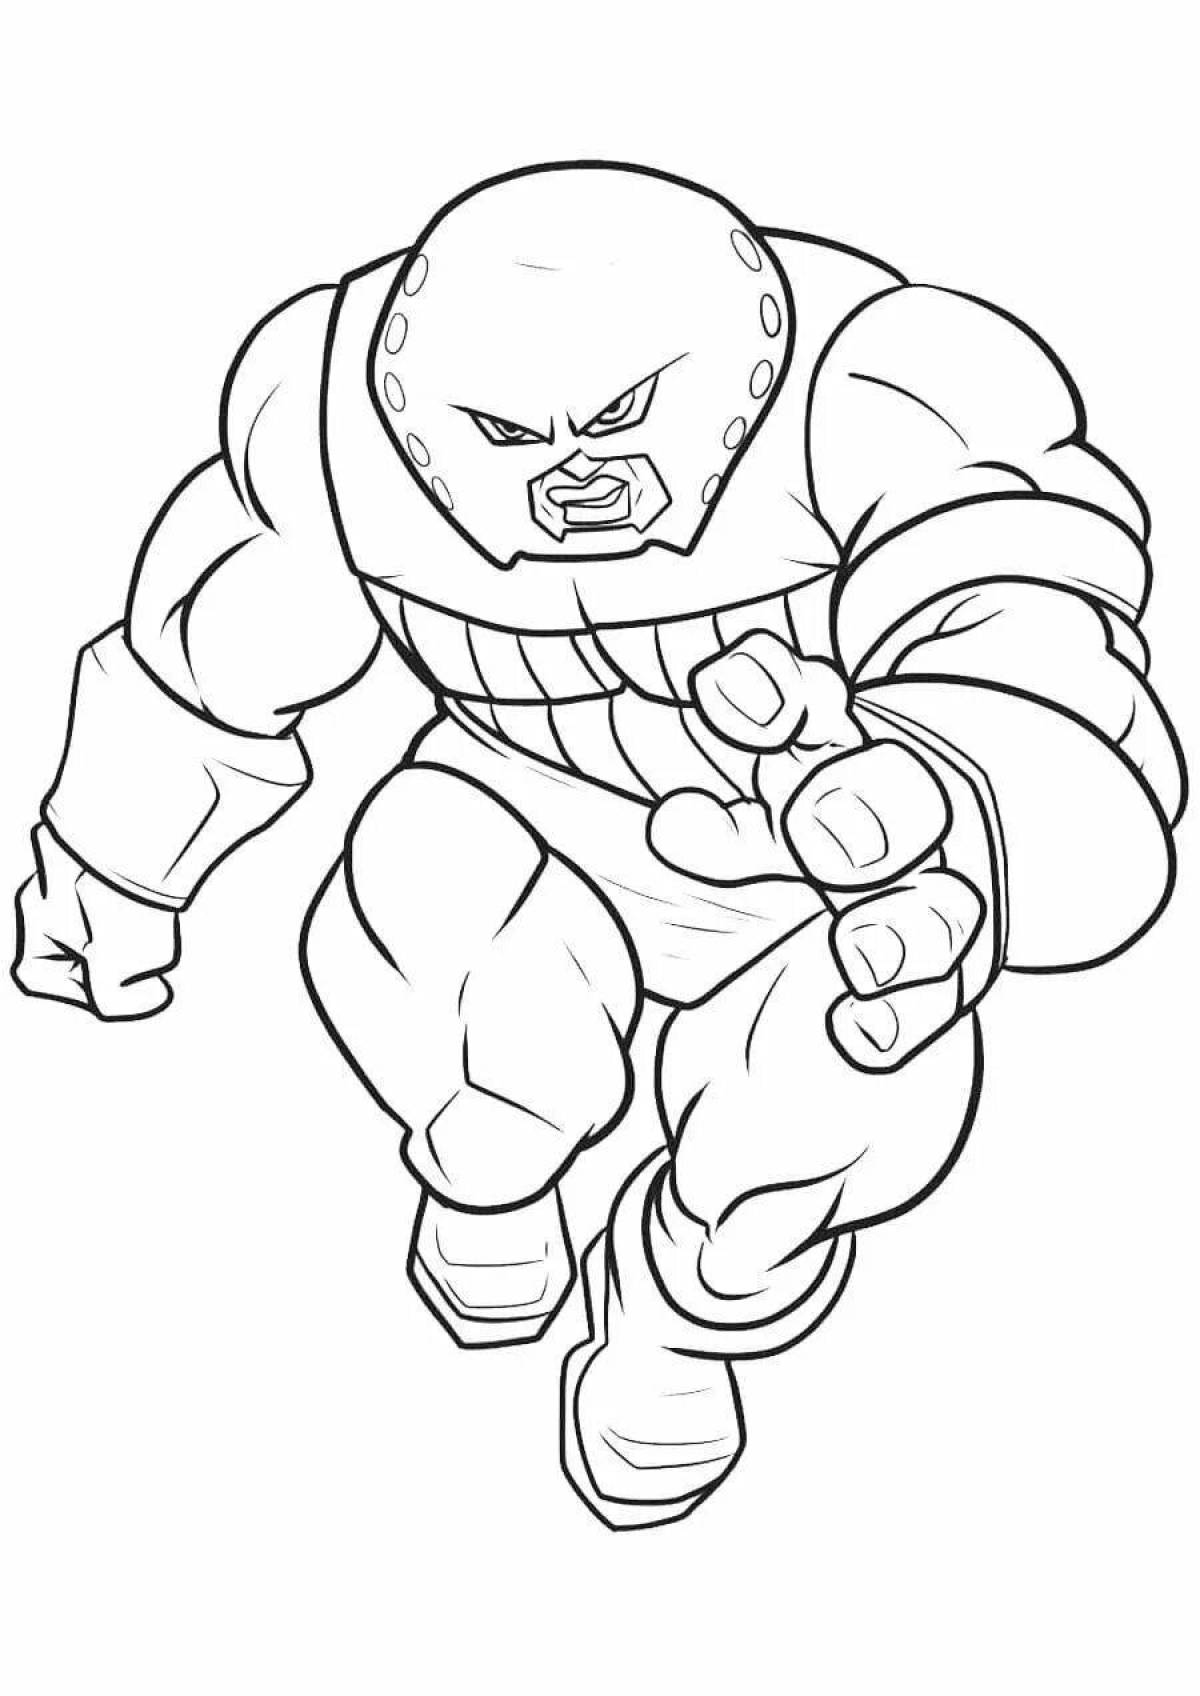 Colorful abomination marvel coloring page